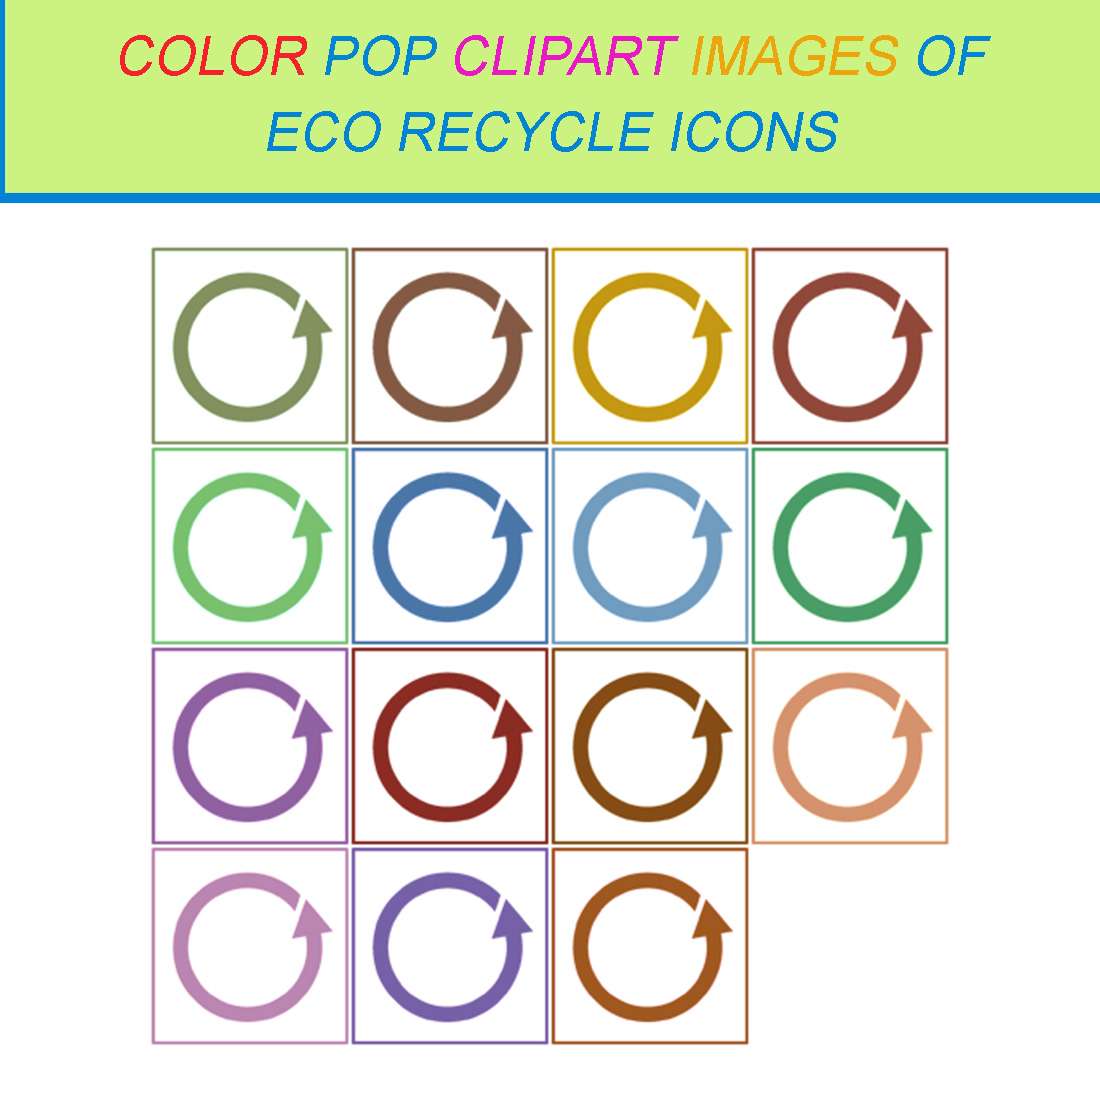 15 COLOR POP CLIPART IMAGES OF ECO RECYCLE ICONS cover image.